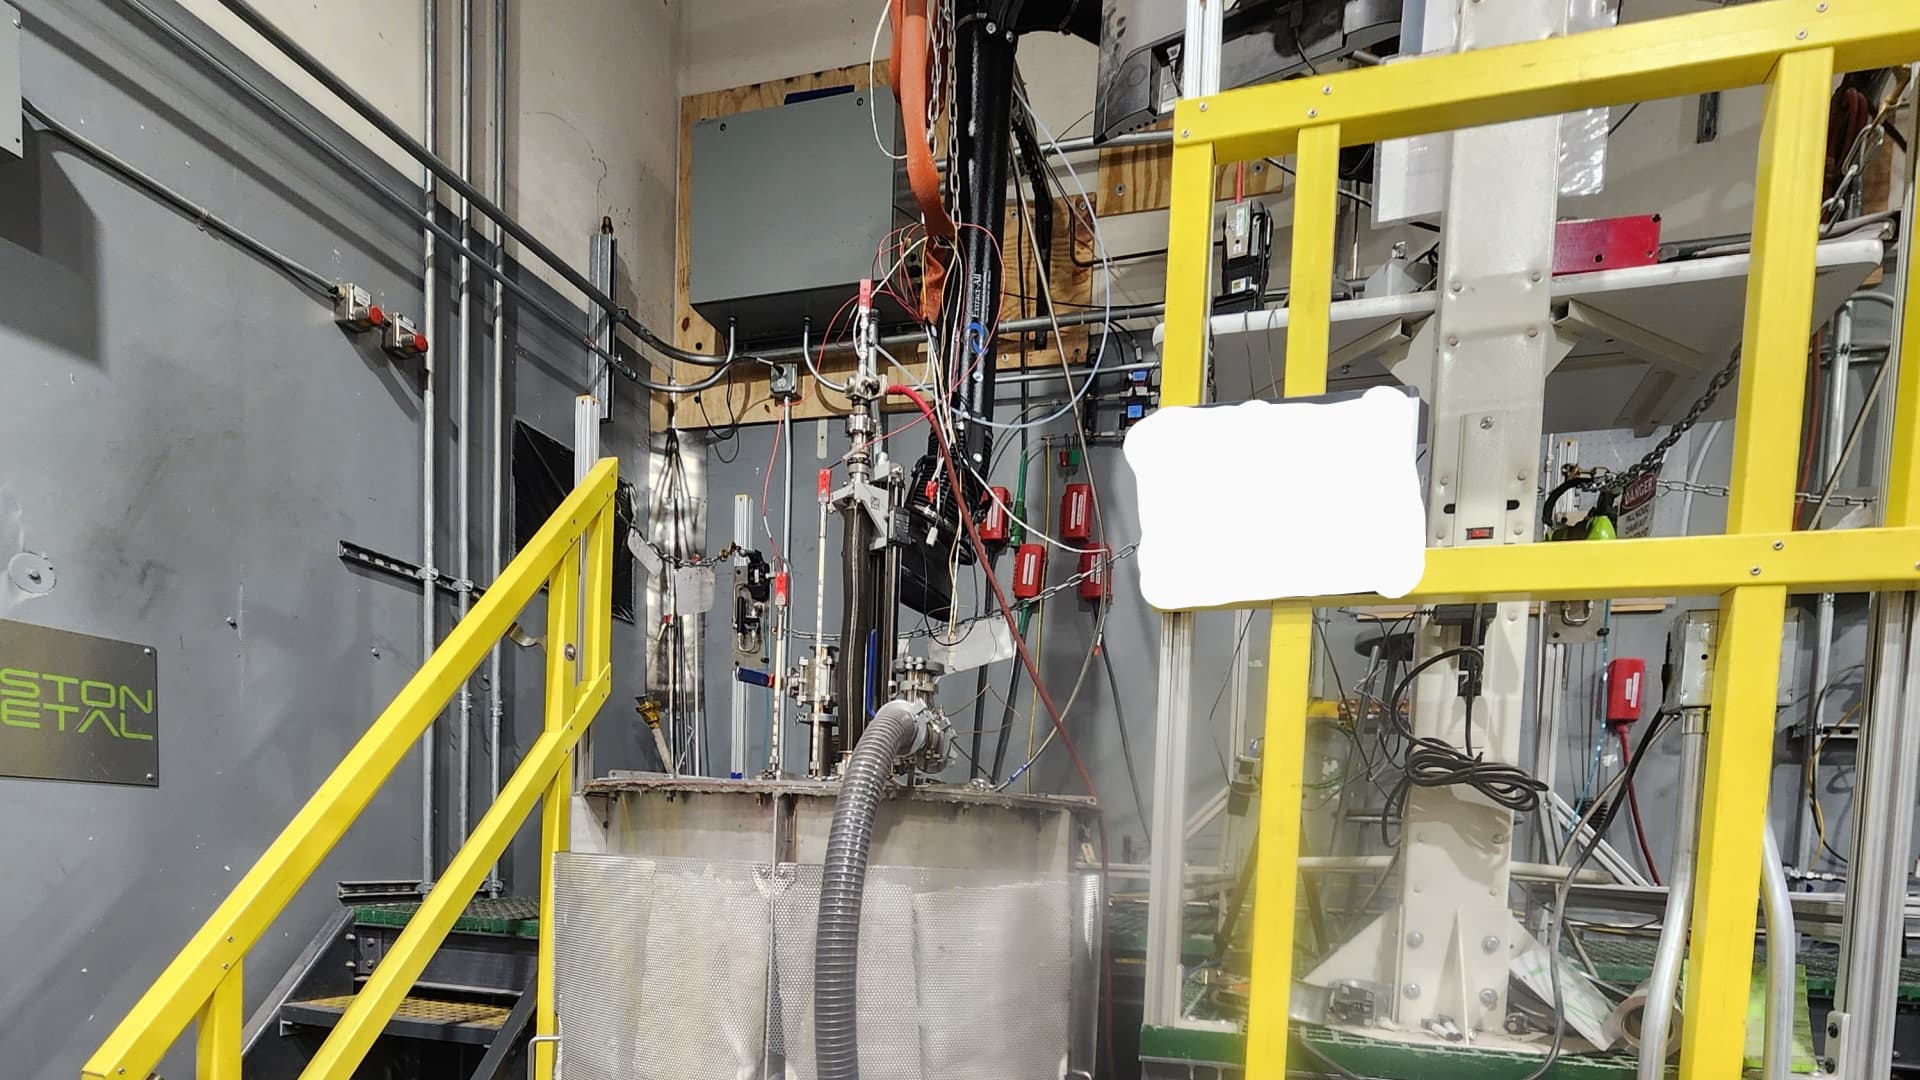 This is a mid-size electrolysis device, between the lab scale bench and the full-scale cell. This can run for weeks at a time and gathers performance data for the anode. (The text on the white board has been covered to protect the intellectual property of Boston Metal.) 